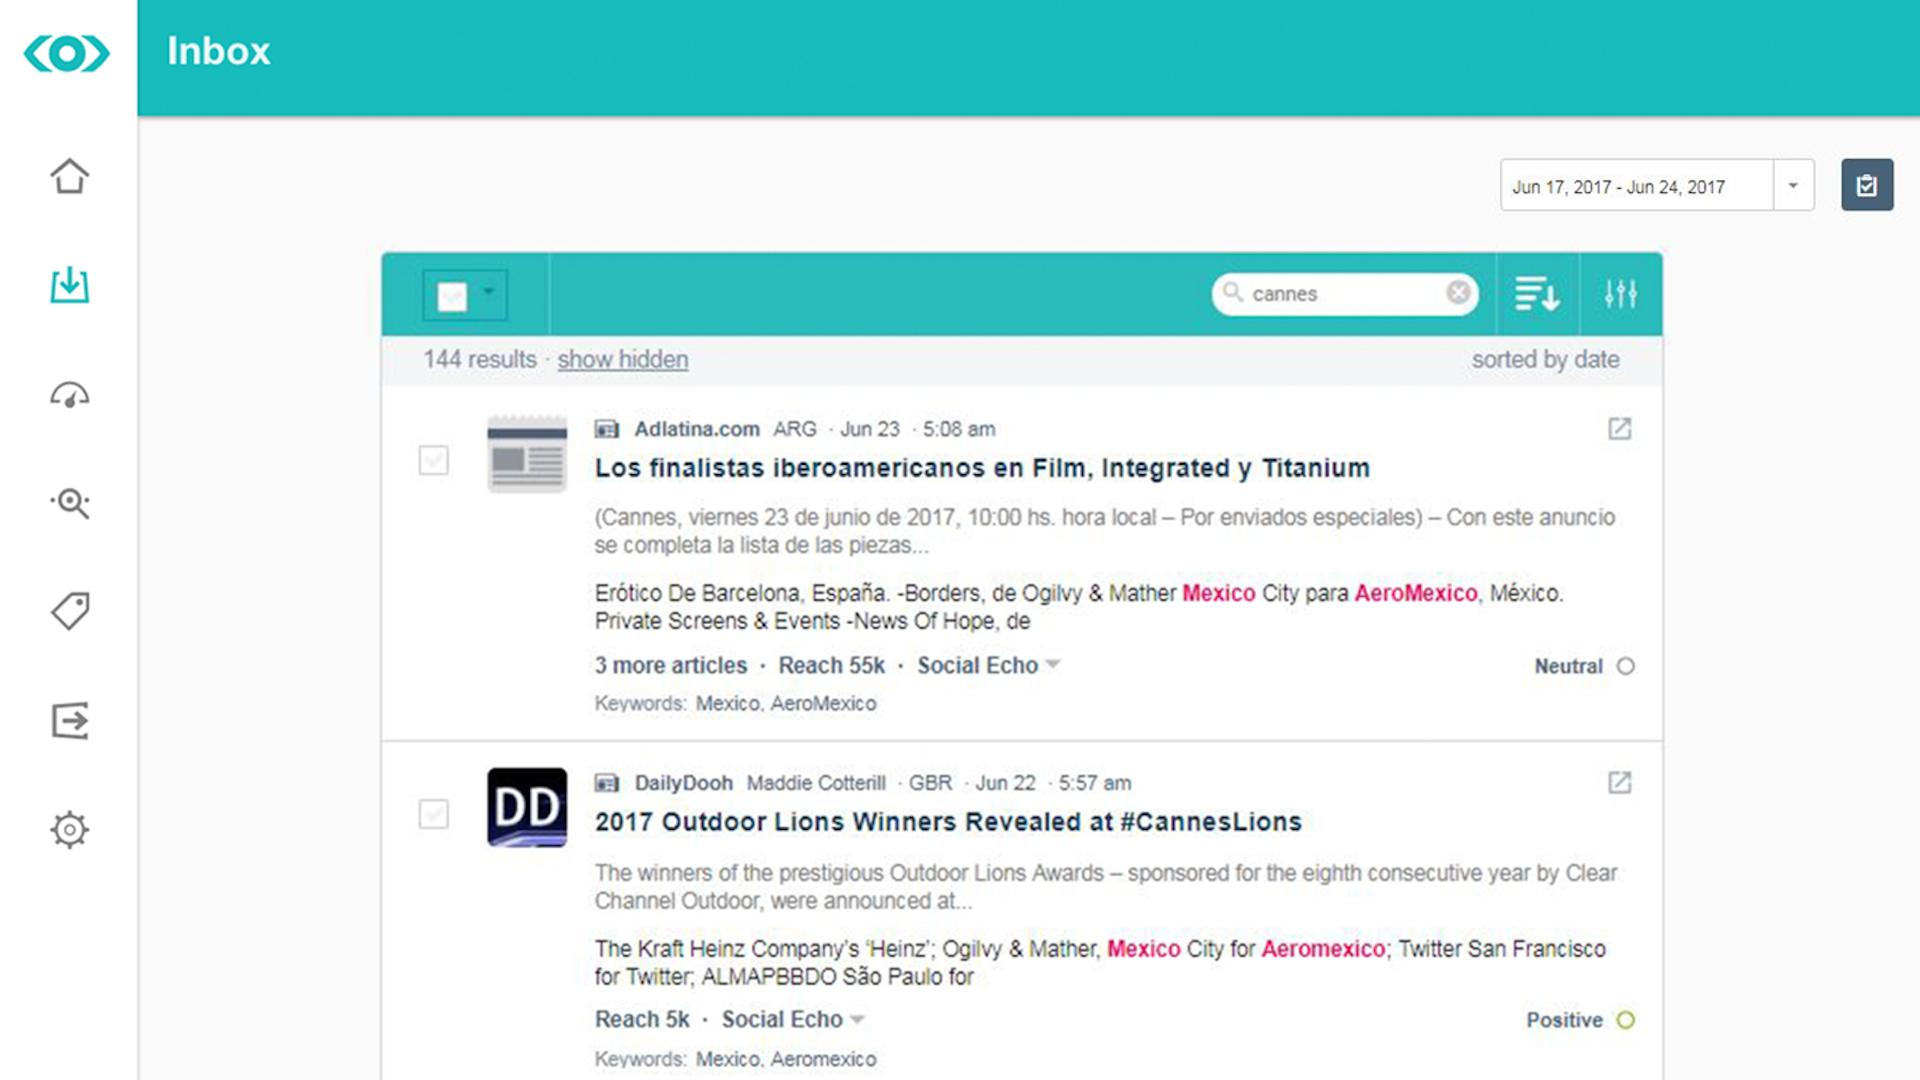 Screenshot of the Meltwater Inbox in the Media Monitoring Suite